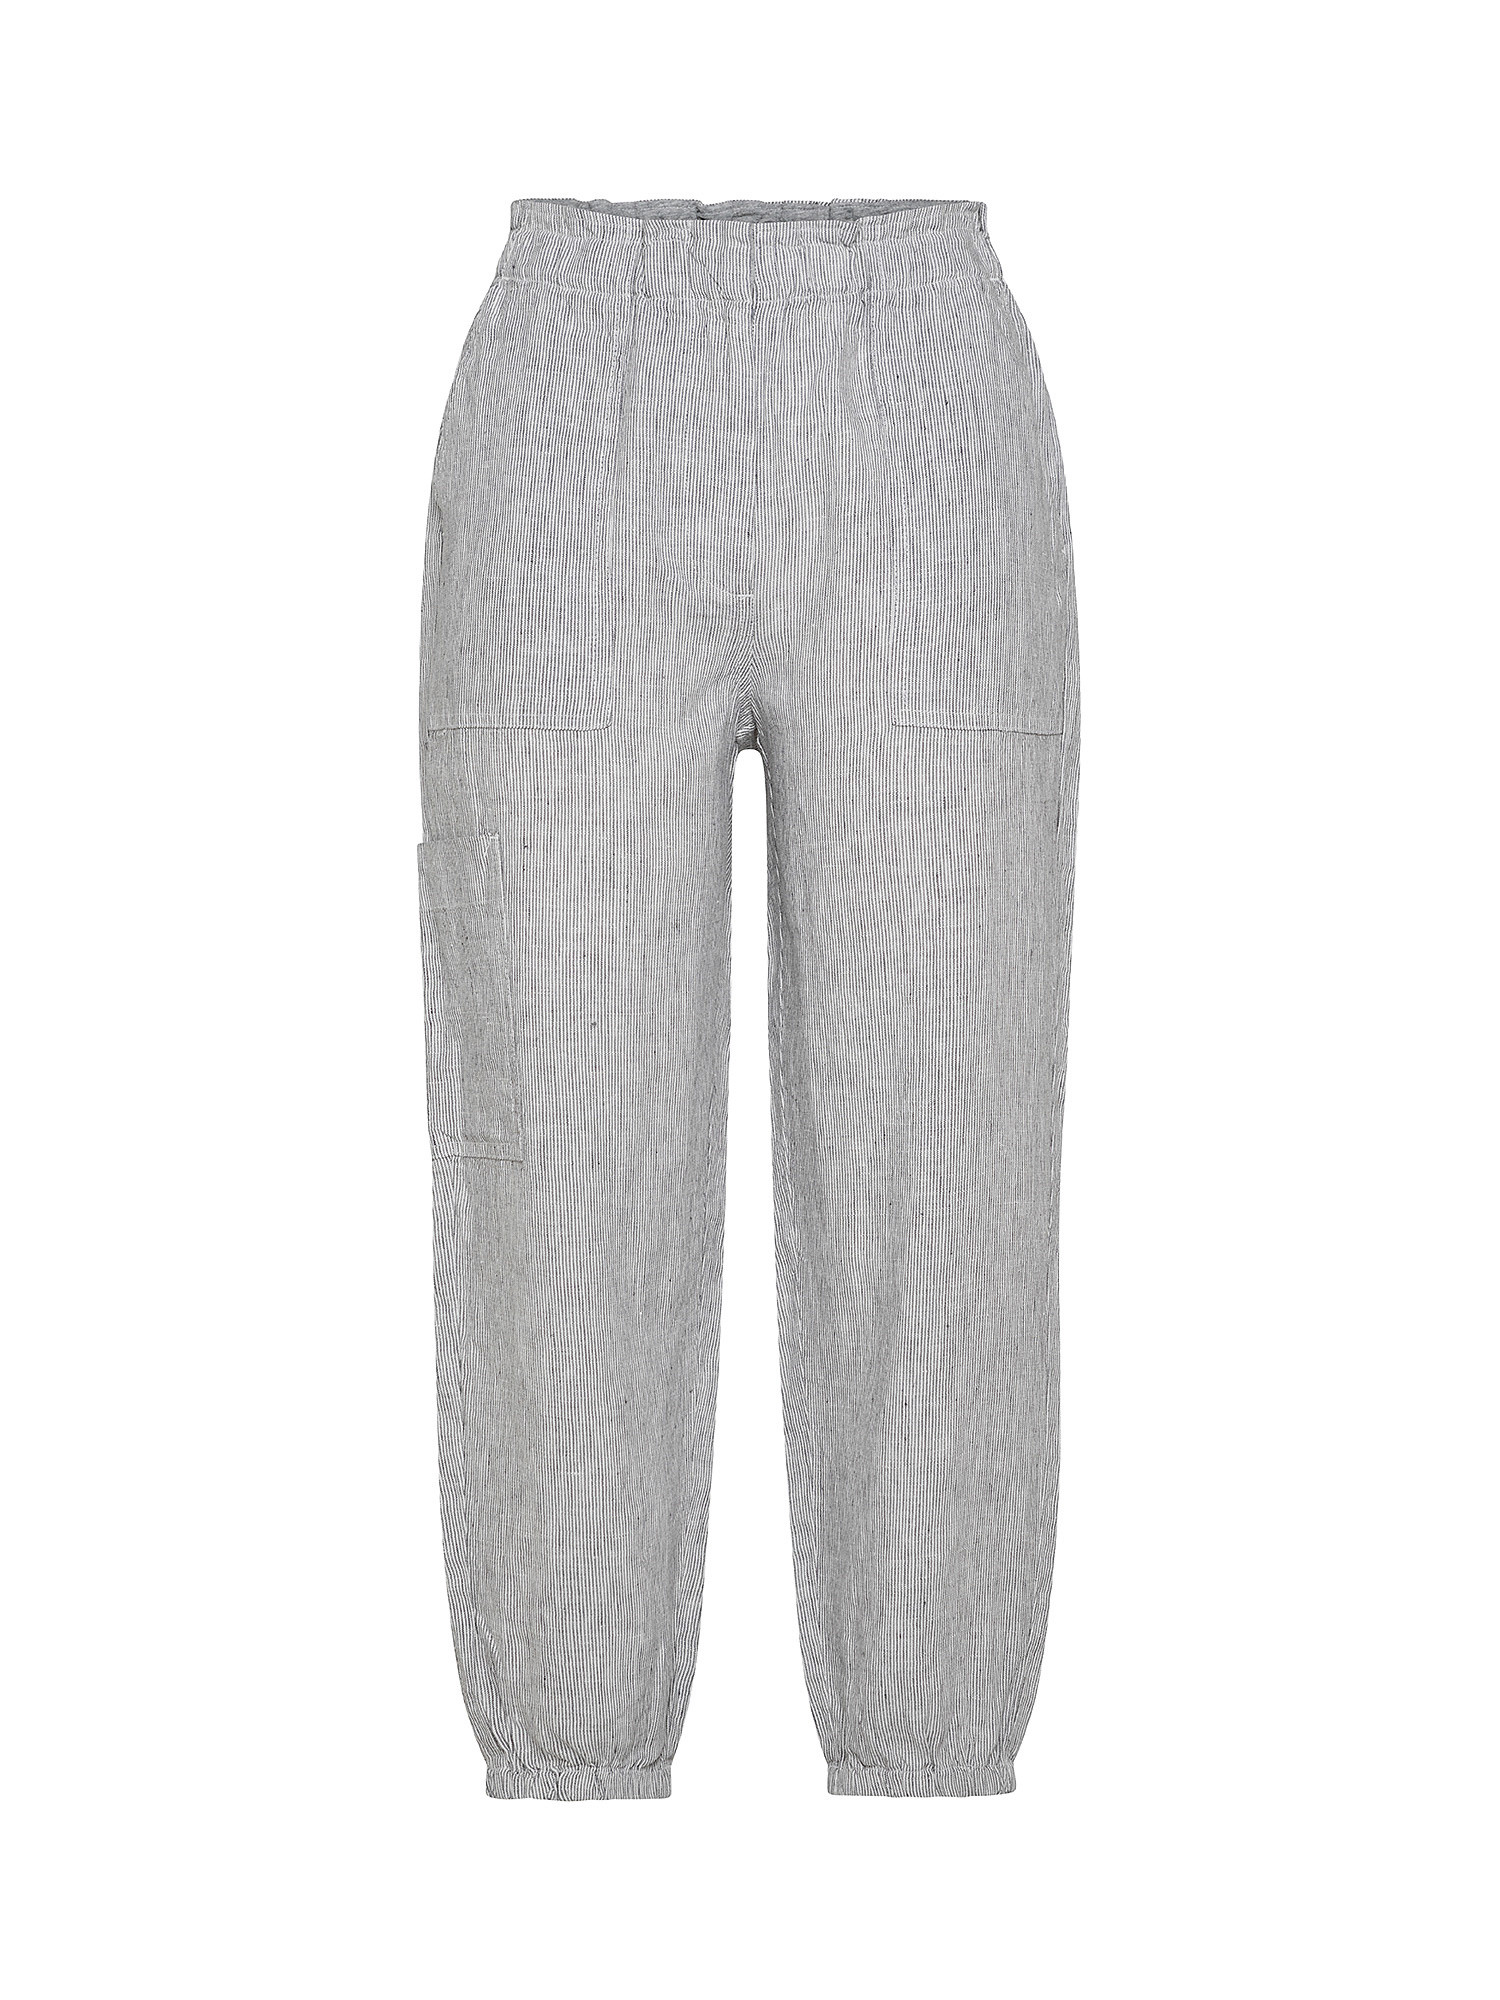 Striped jogger trousers, Grey, large image number 0